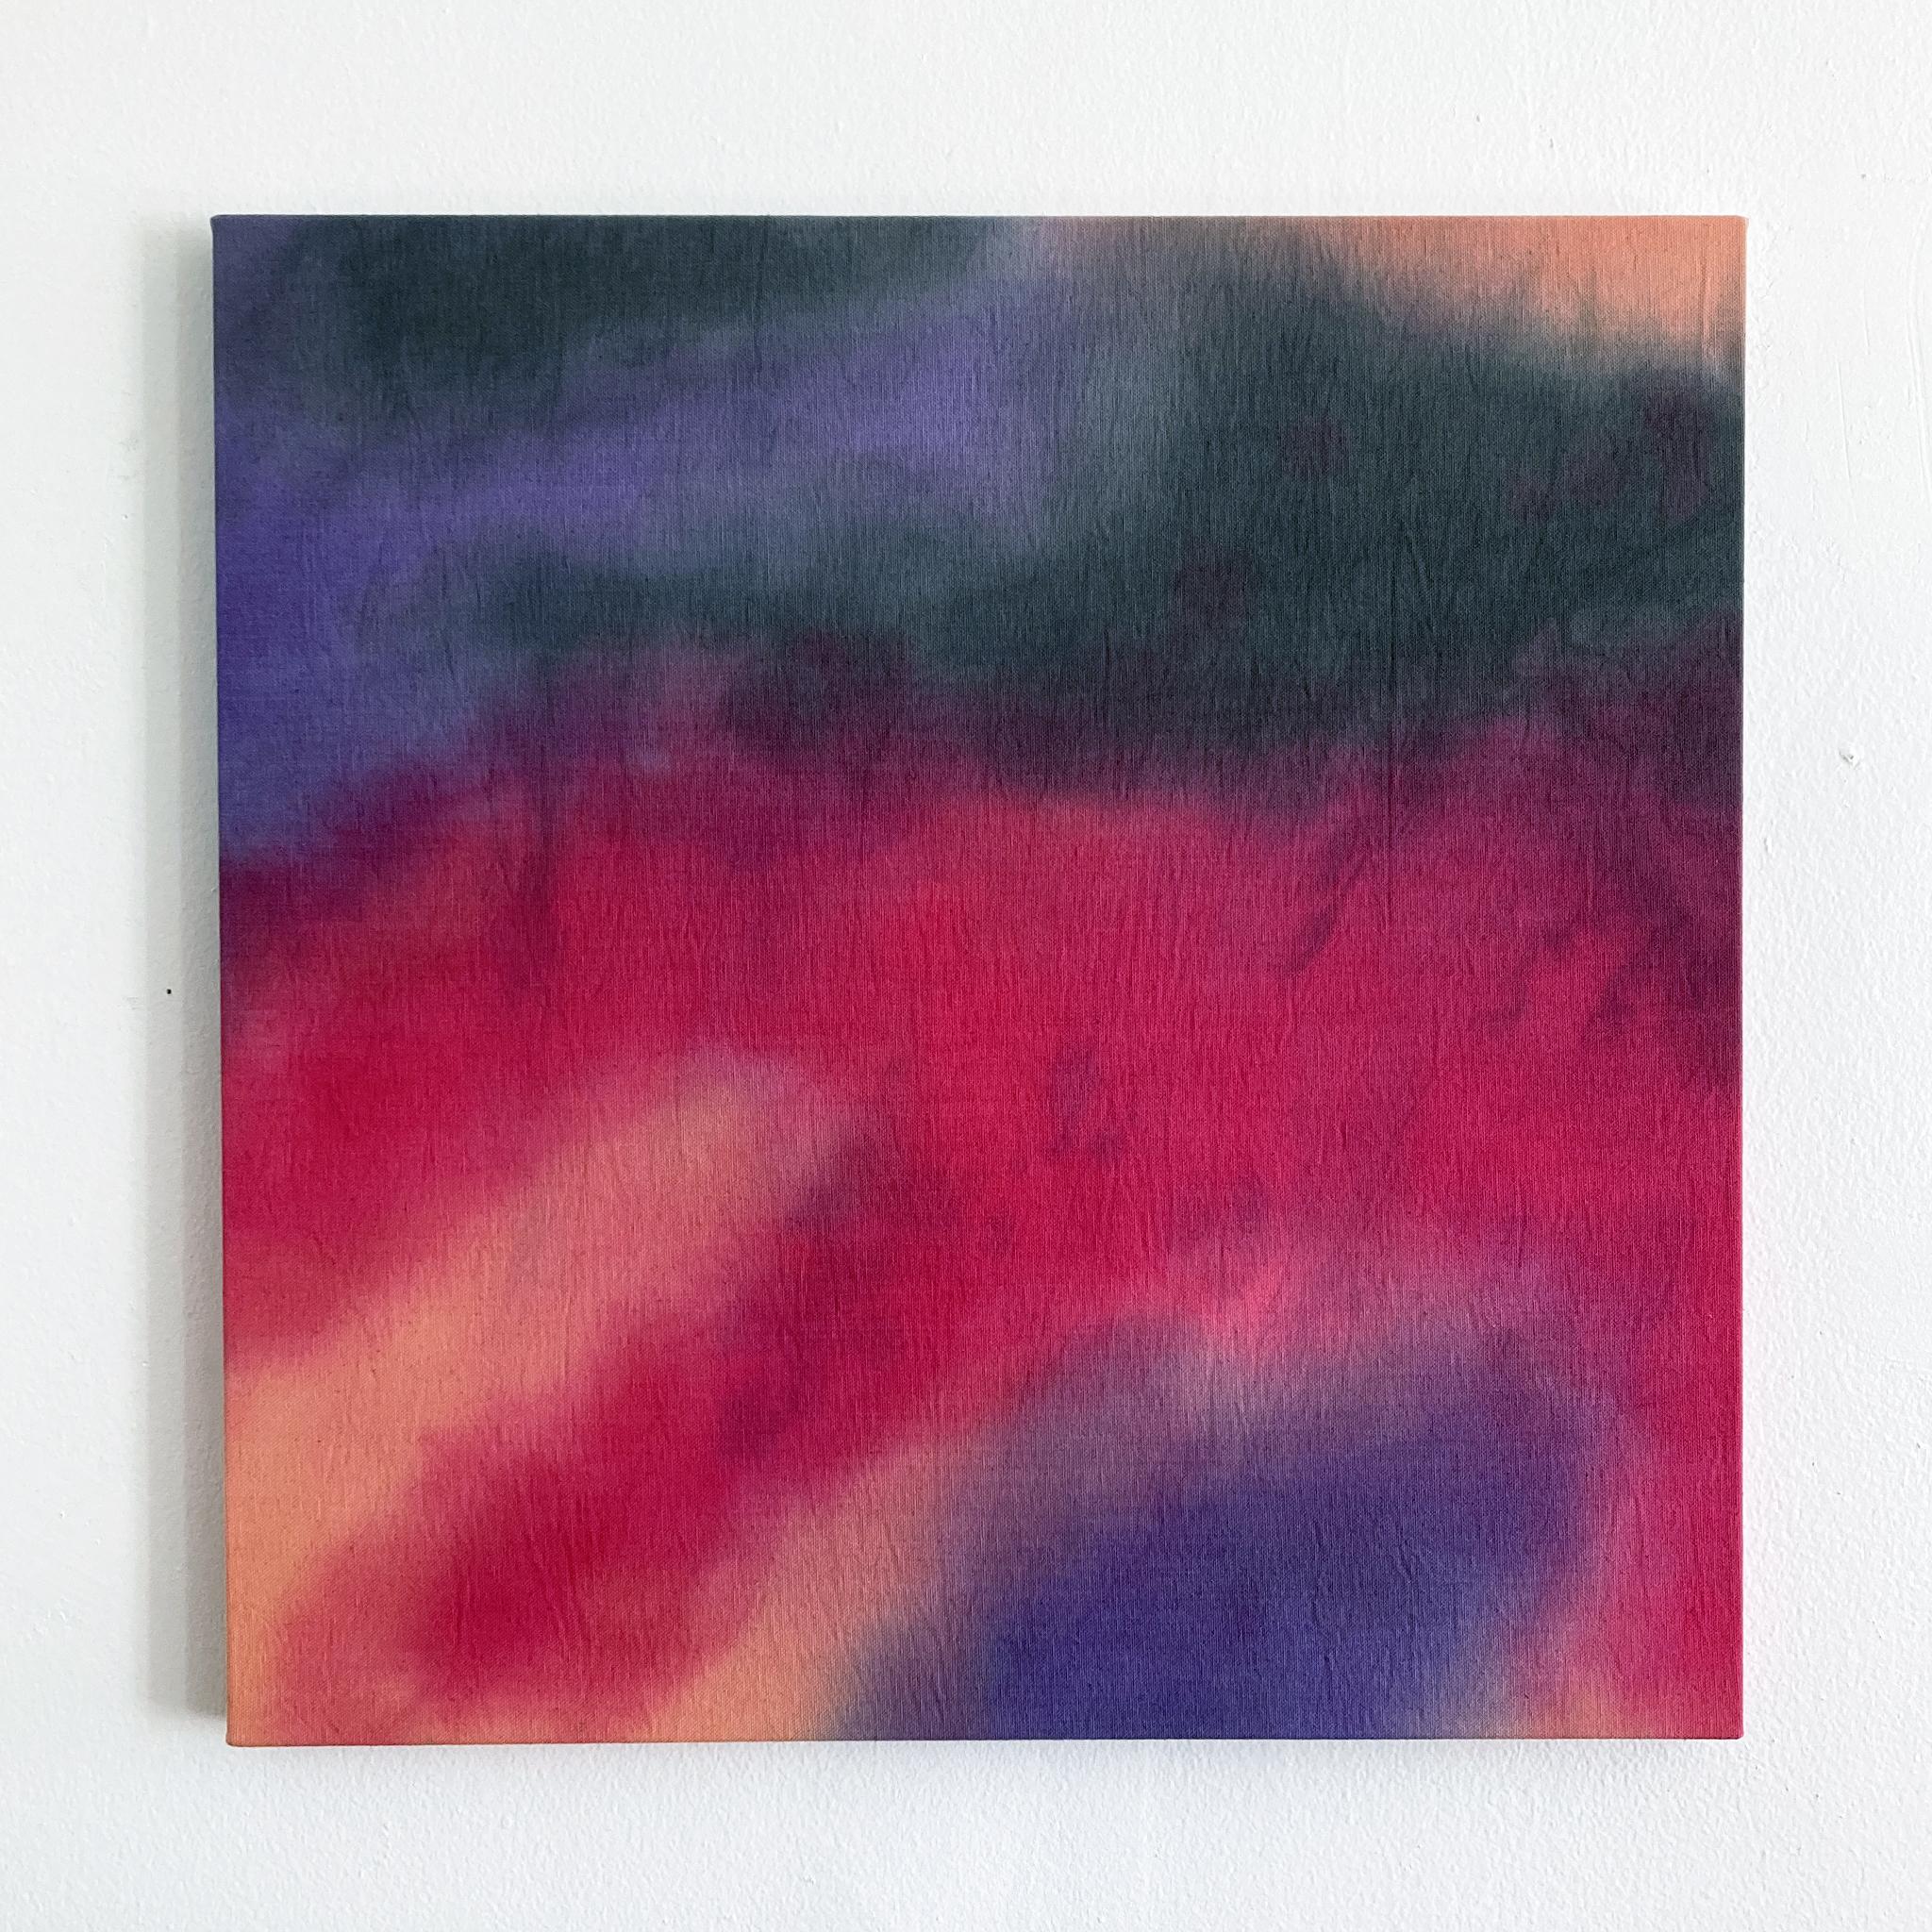 An ethereal abstract painting, created in our NYC studio. This 22 x 22 inch canvas is a place for the eye to wander. Magenta, peach, slate and lilac create a calming yet vibrant piece.

This series of paintings is an extension of my exploration of